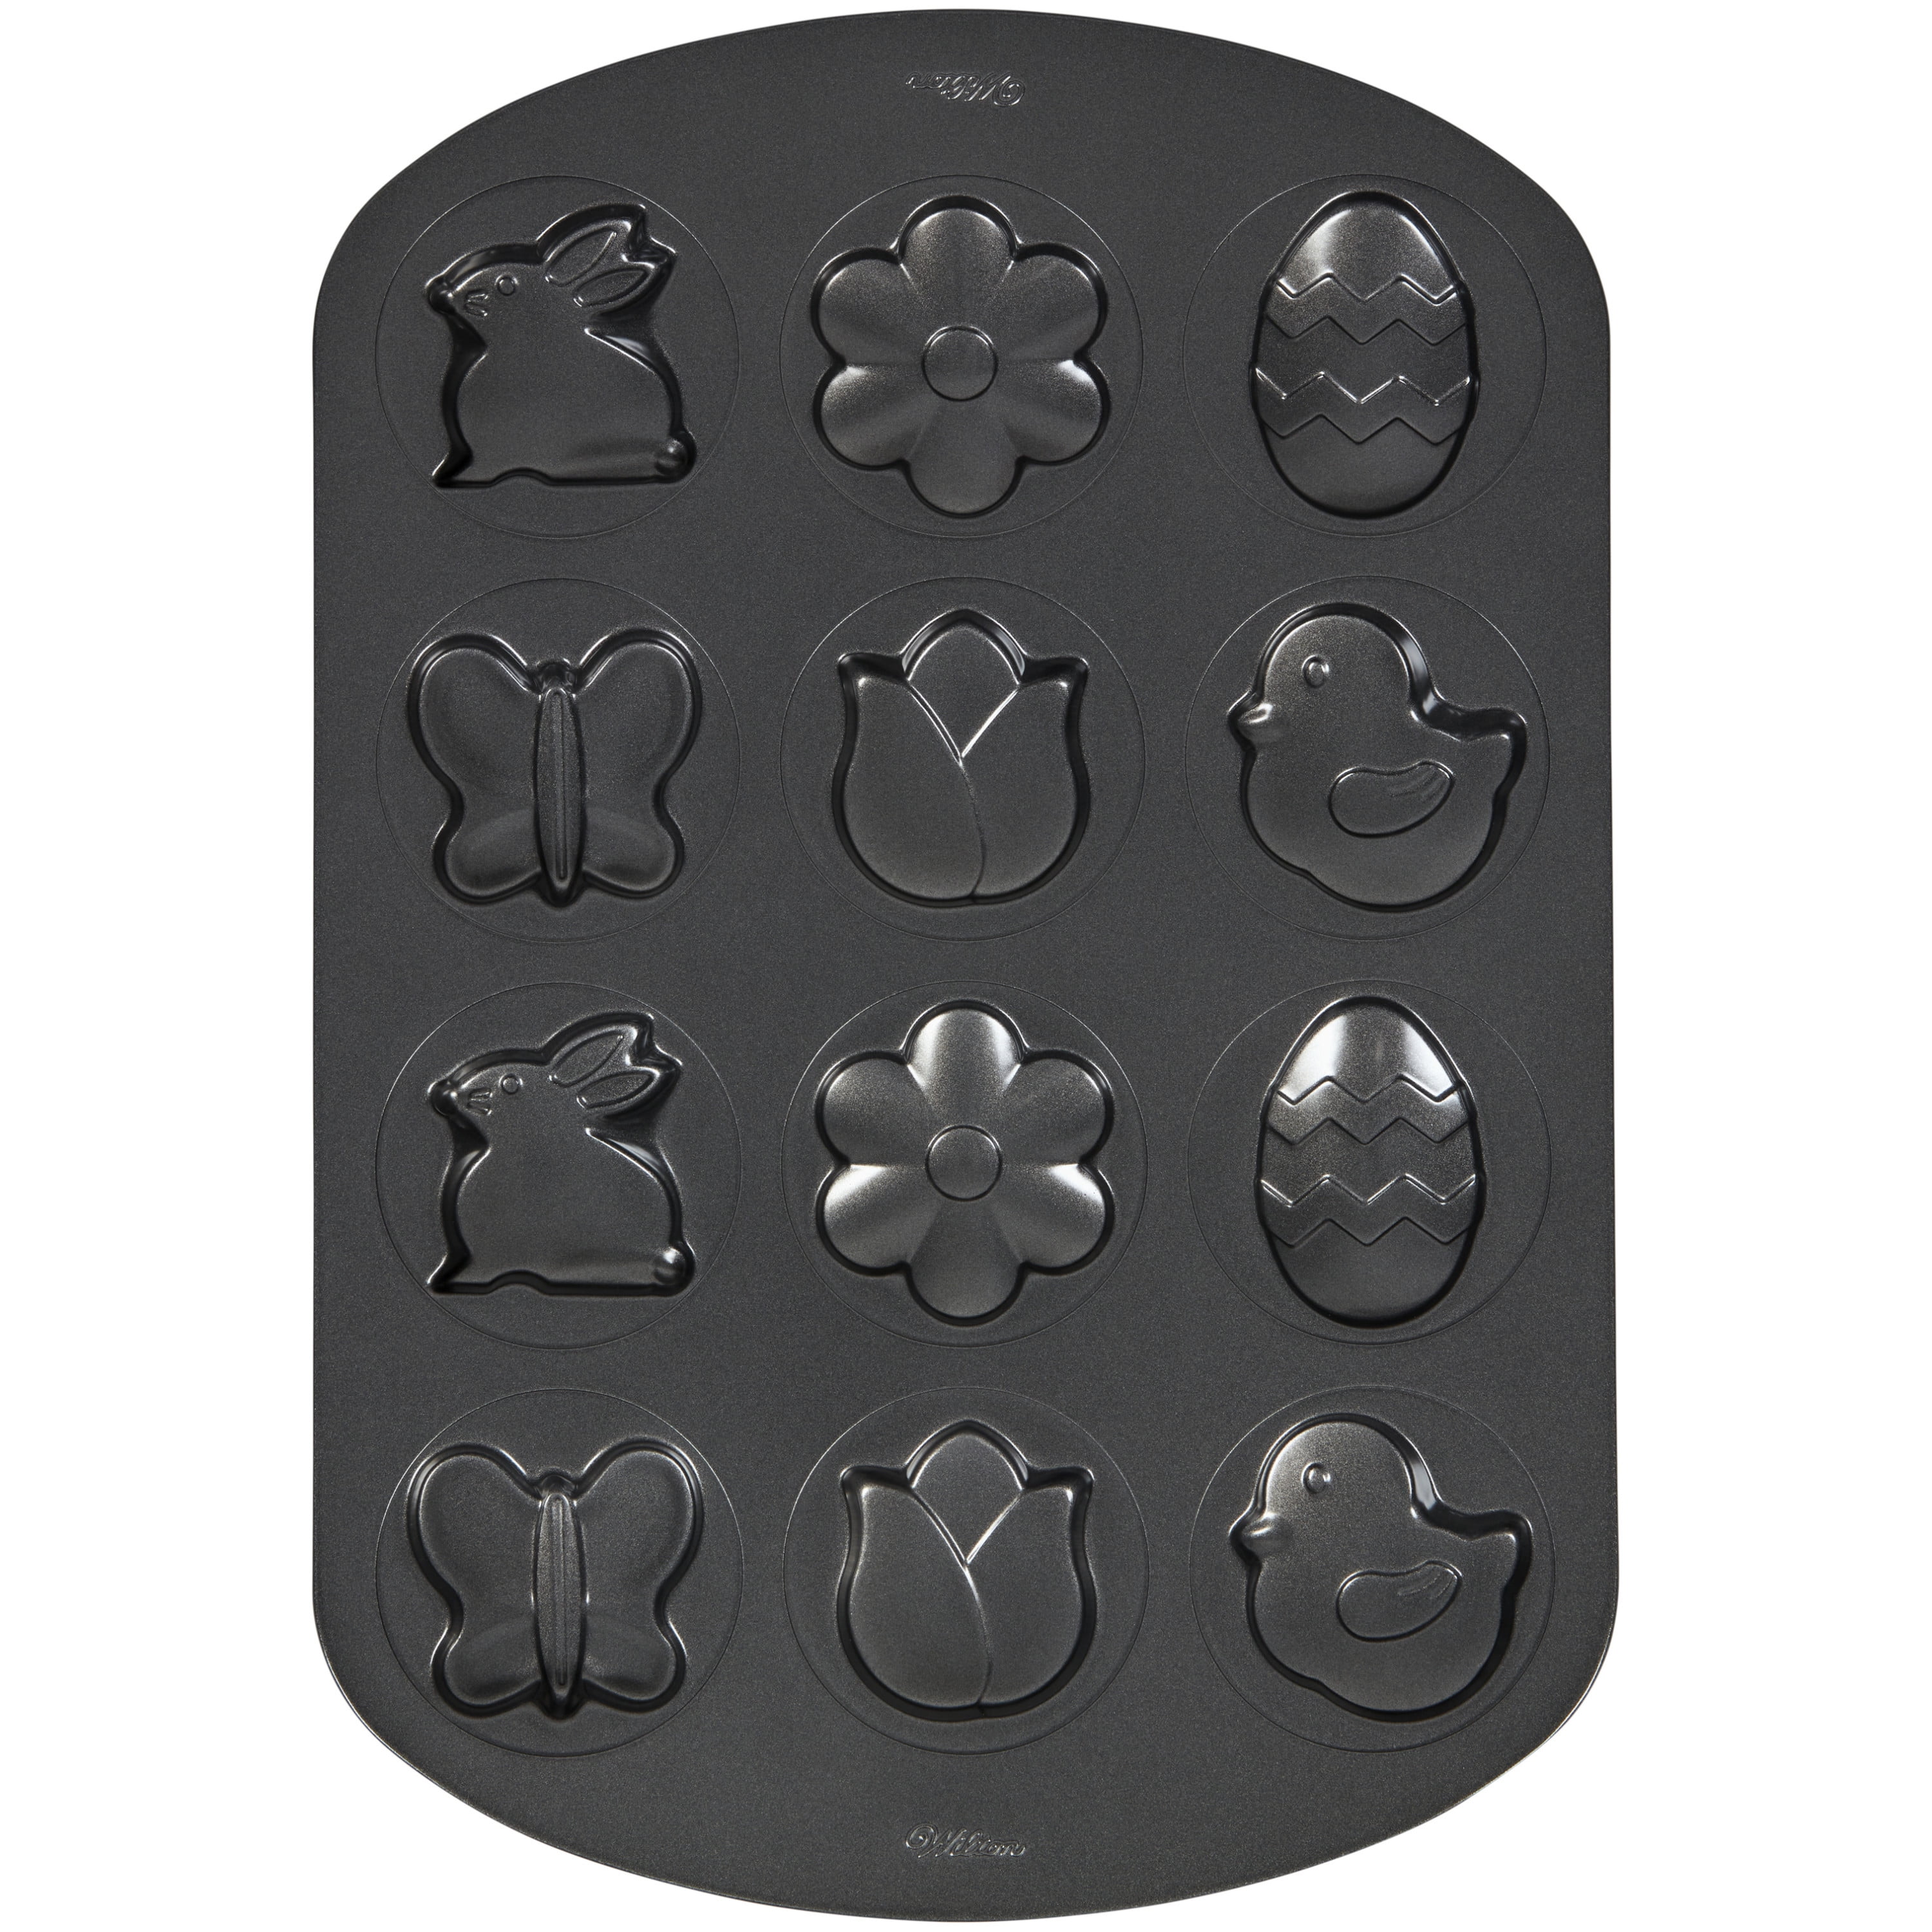 Wilton Dragonfly, Butterfly and Flower Silicone Candy Mold, 12-Cavity